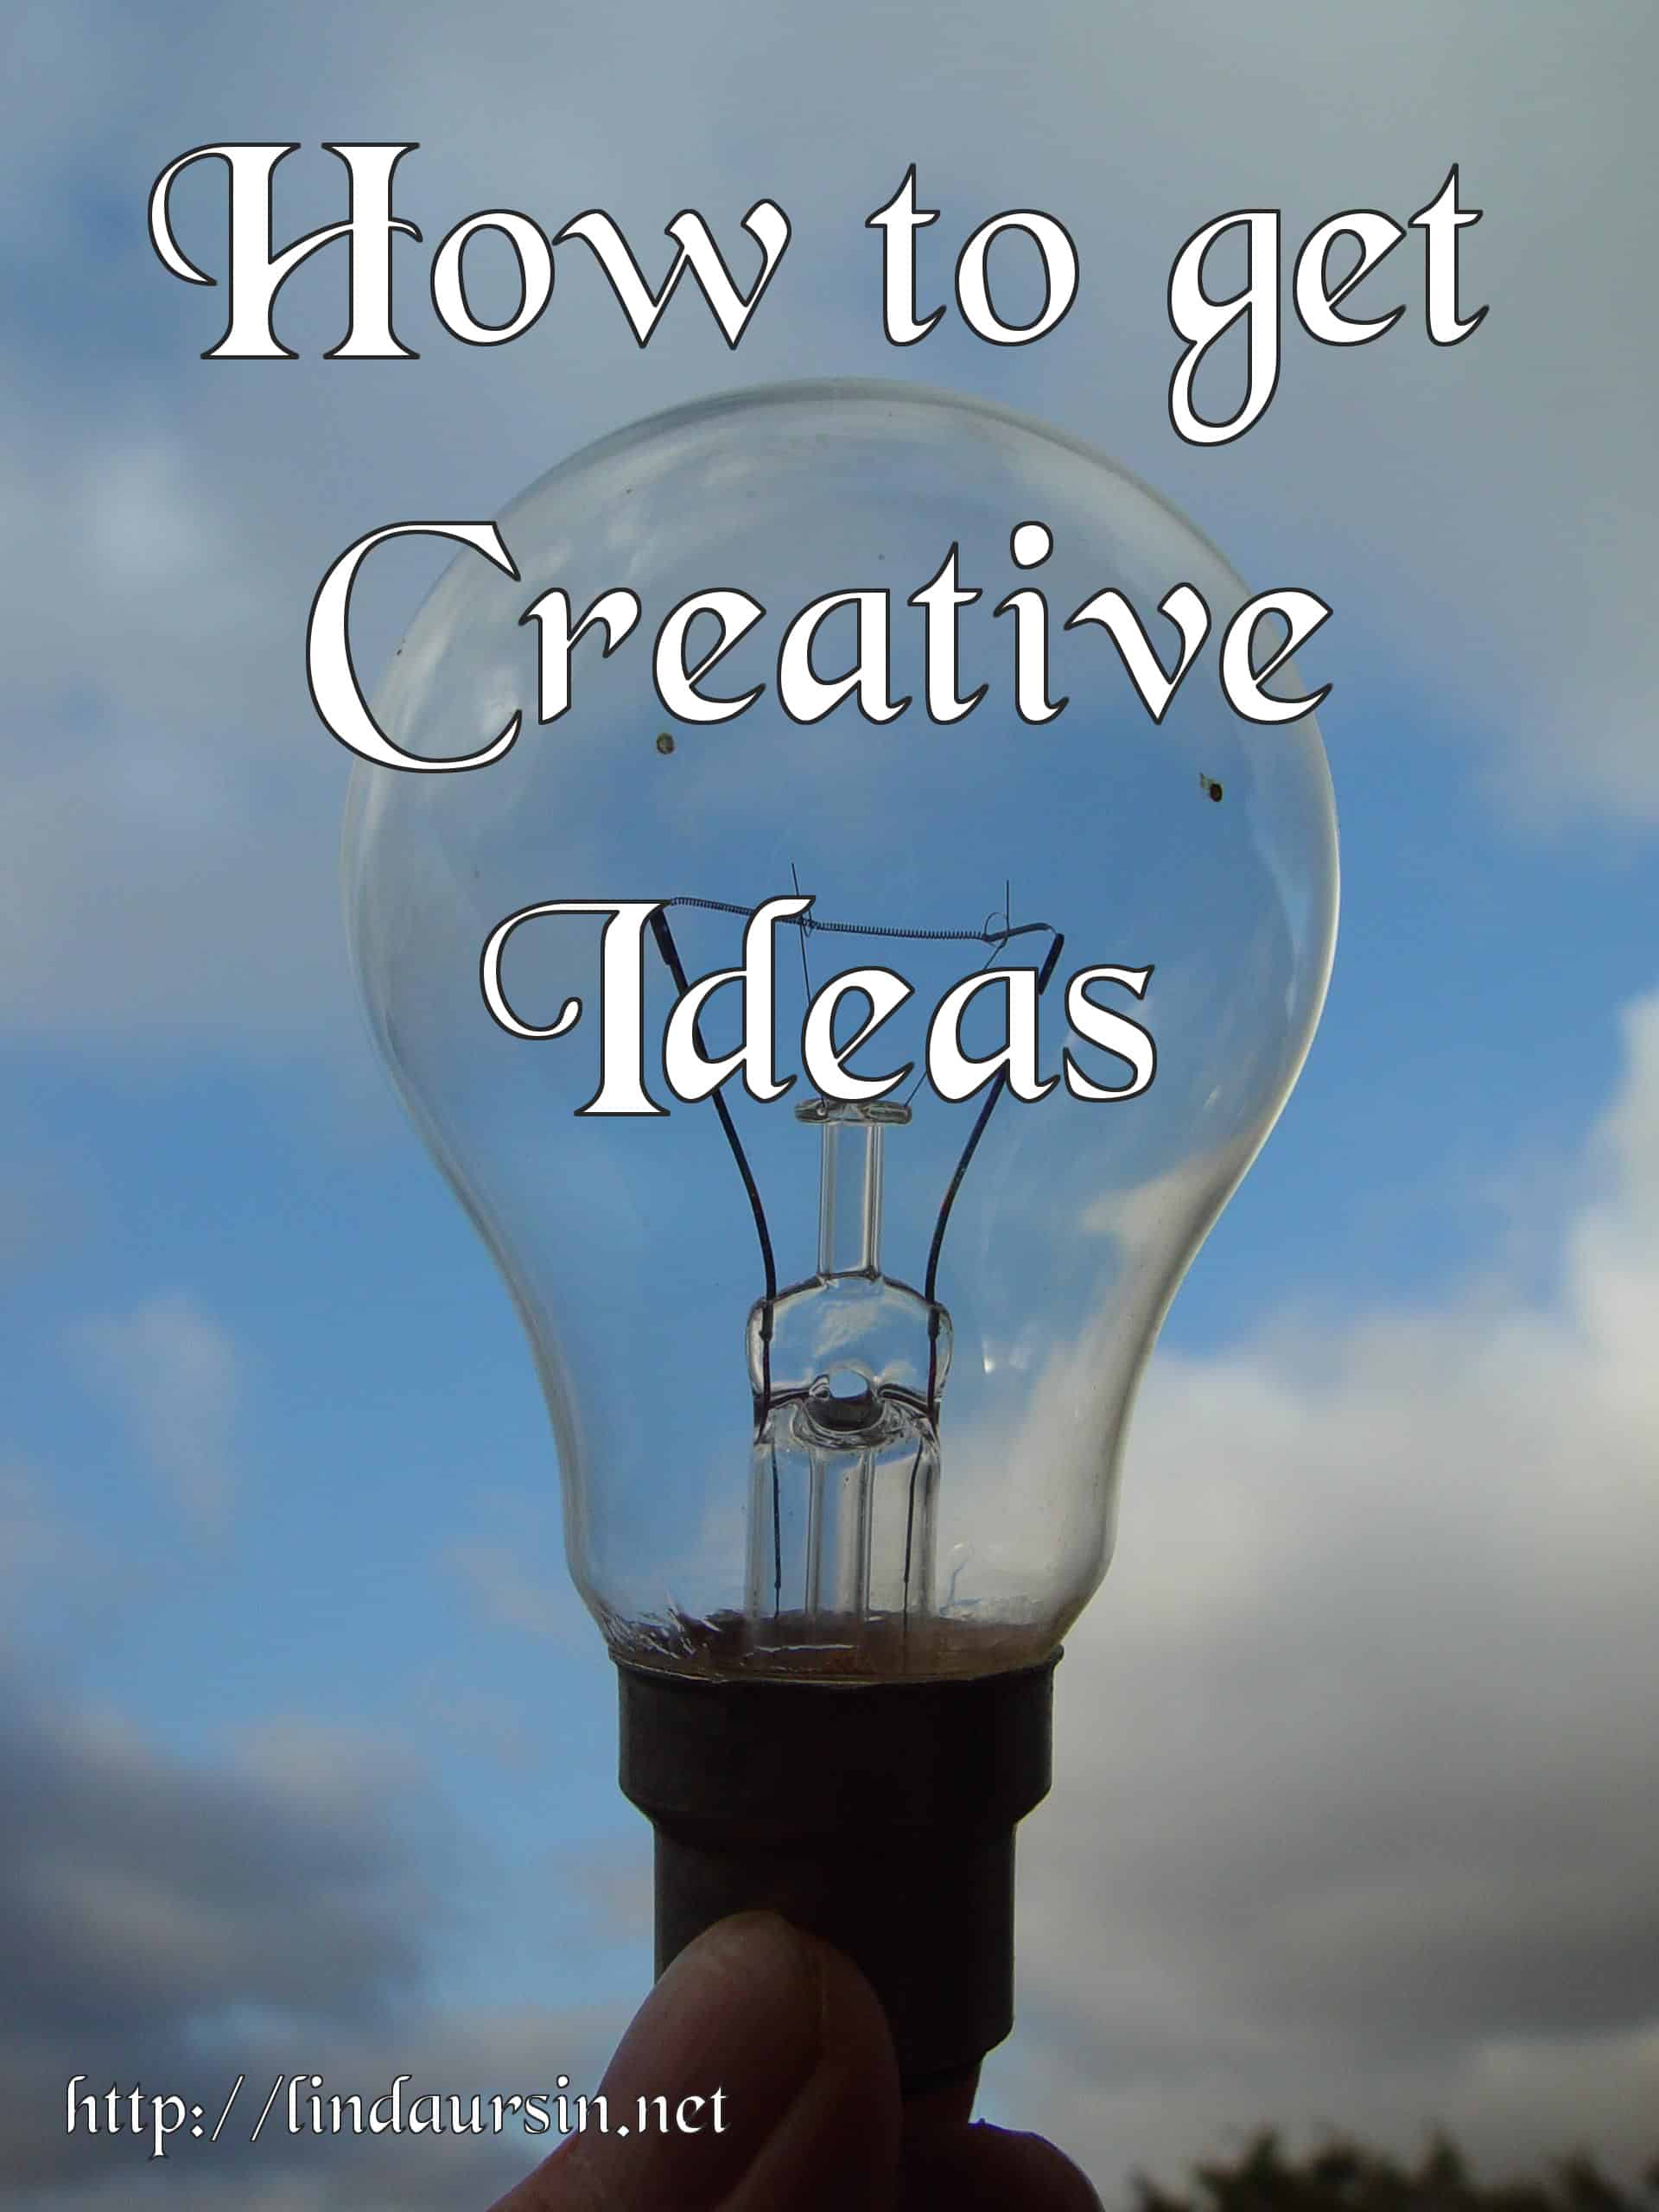 How to get creative ideas